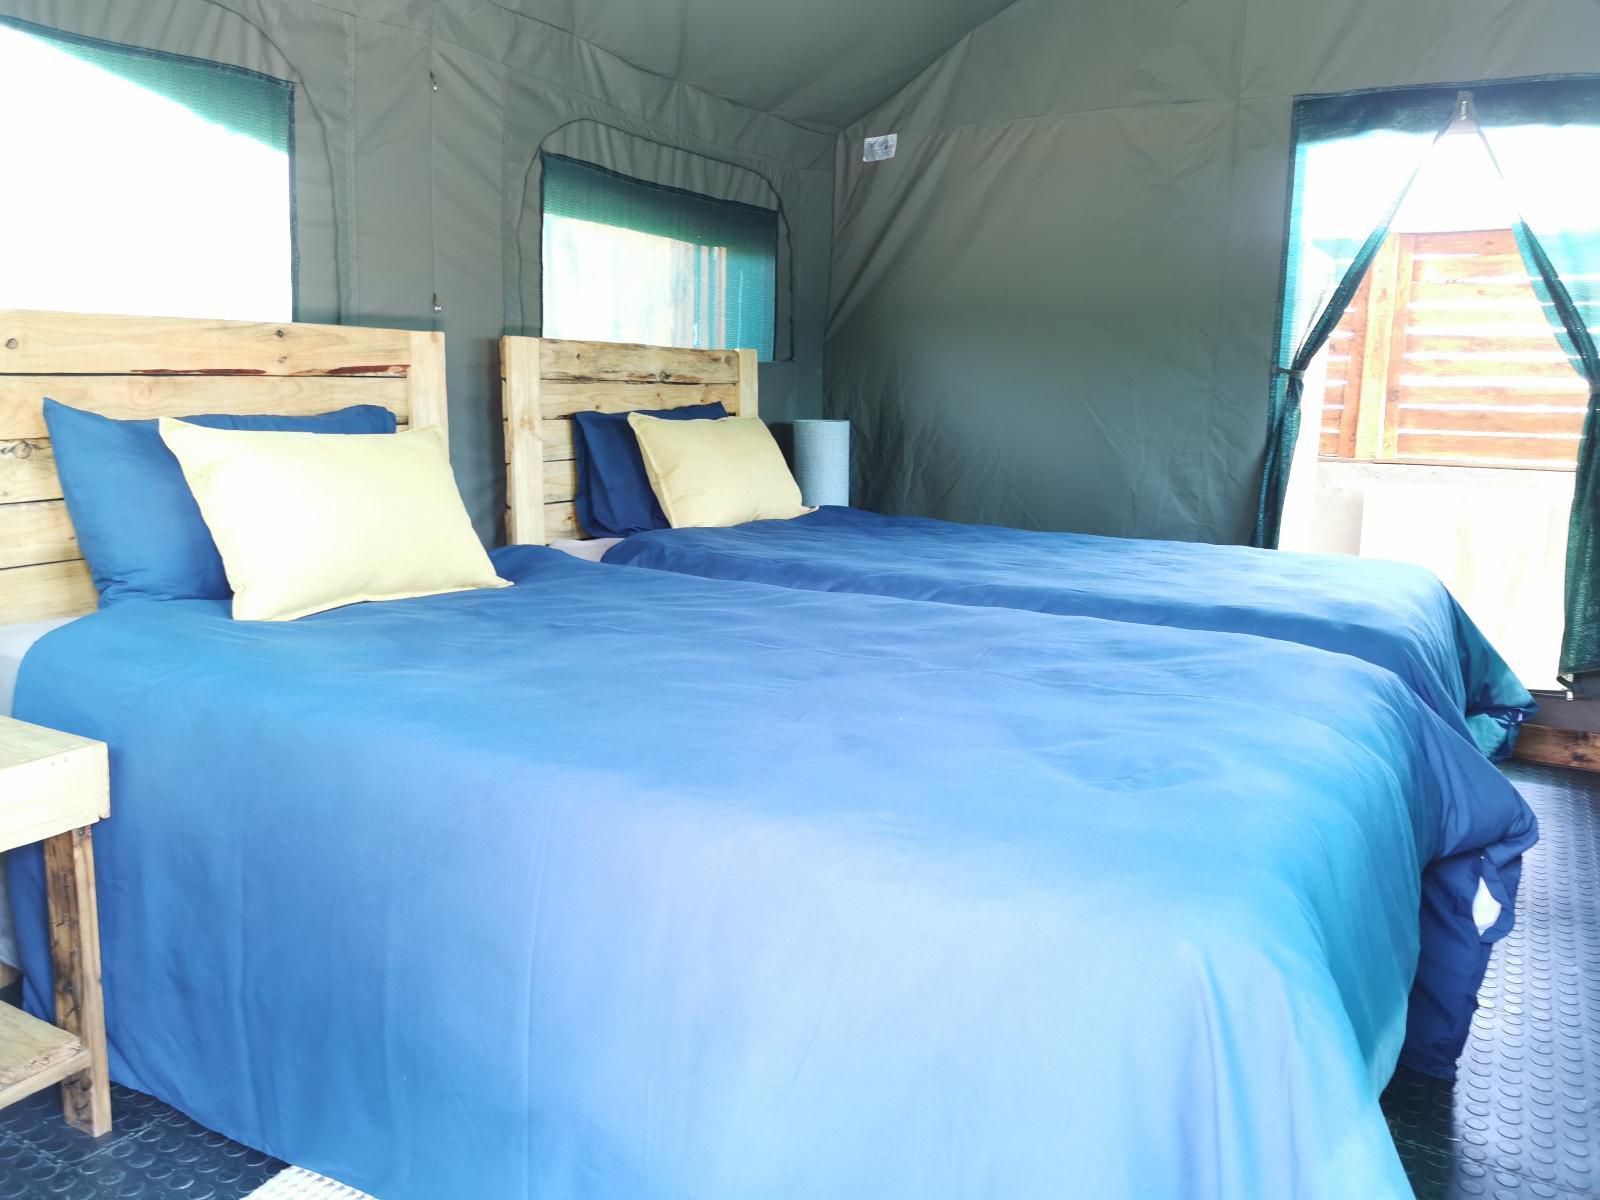 Mthembuskloof Country Lodge Ss Skosana Nature Reserve Mpumalanga South Africa Tent, Architecture, Bedroom